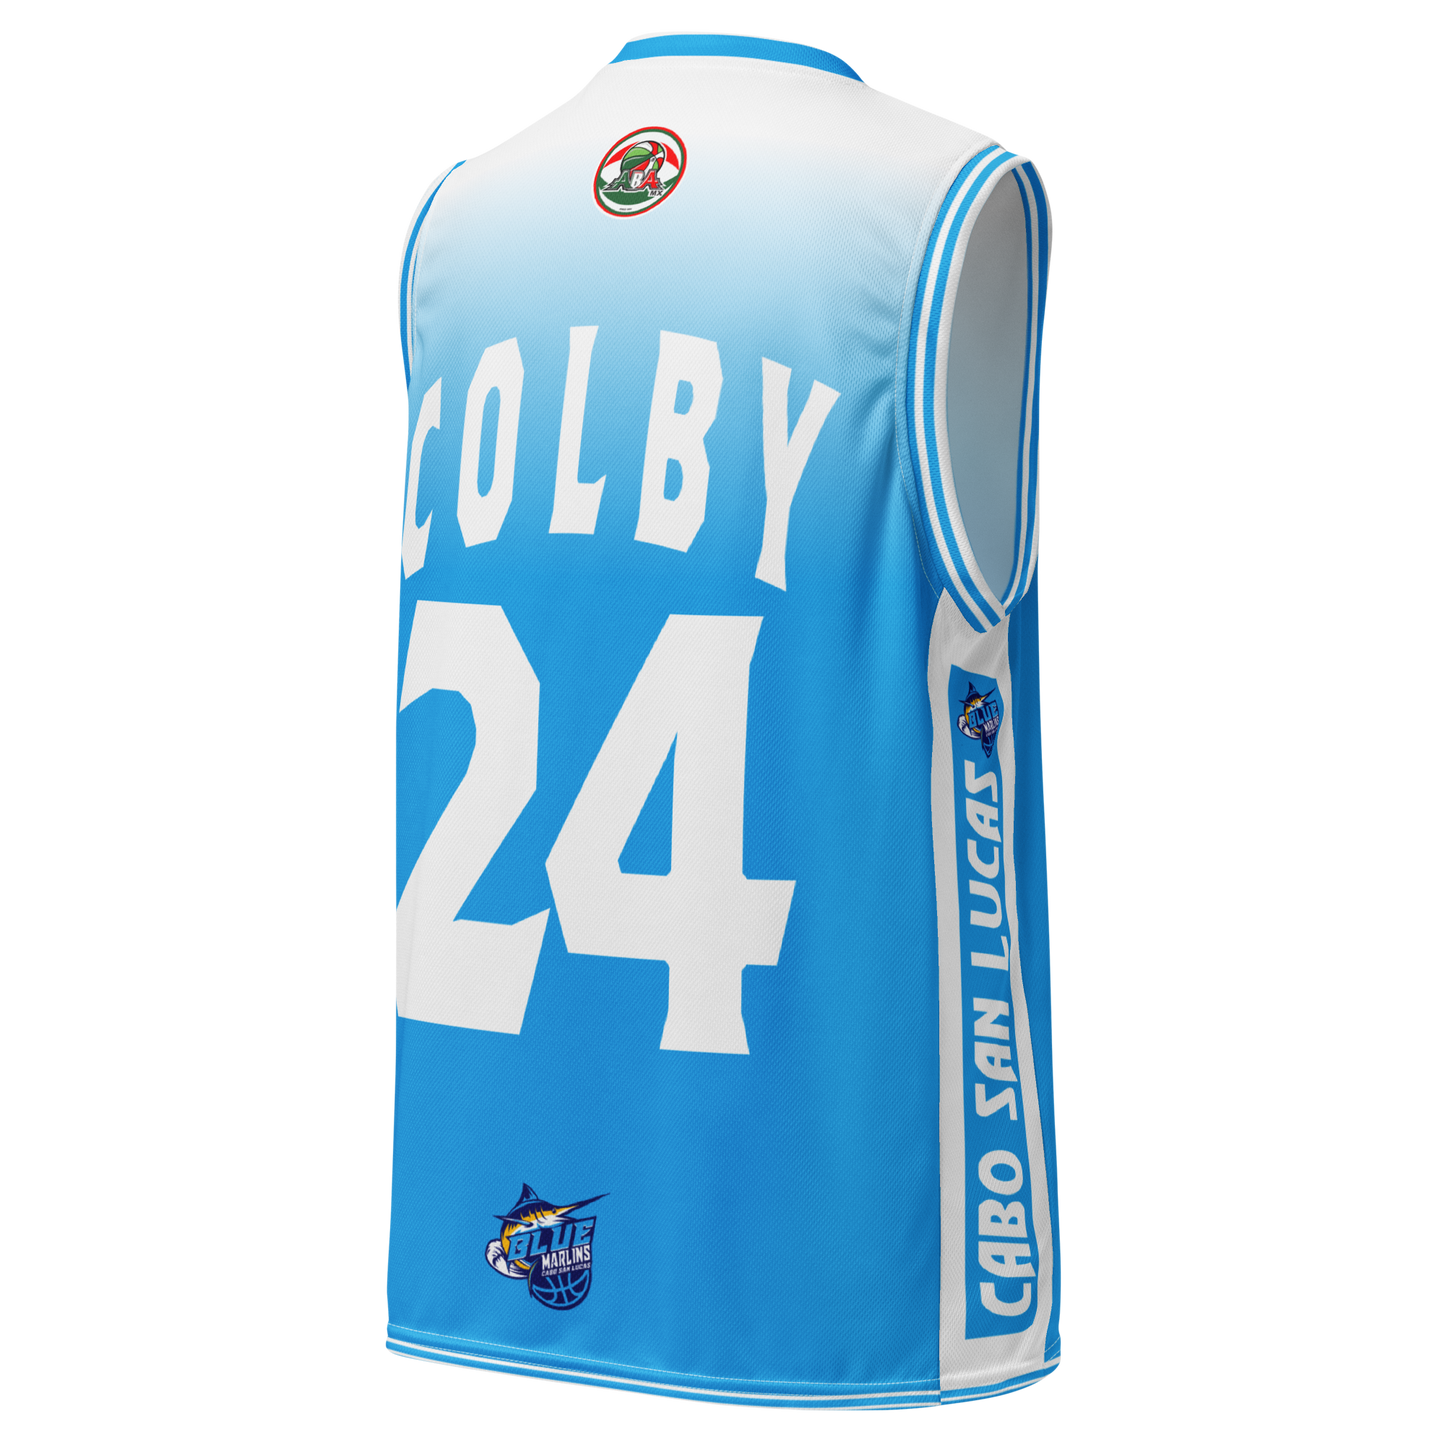 #24 COLBY